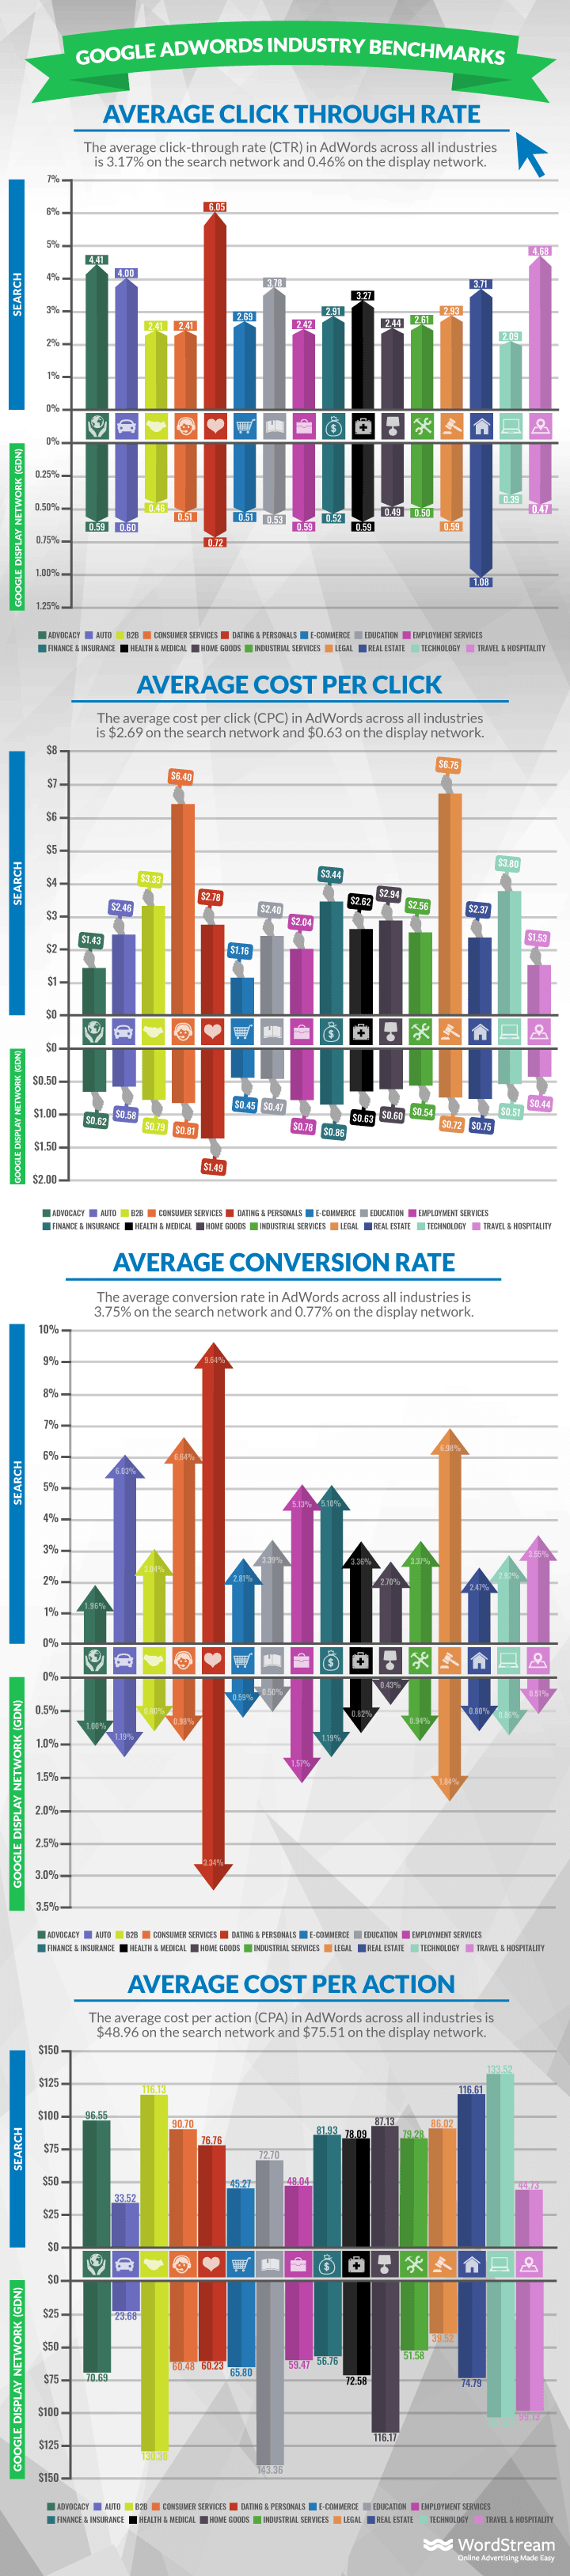 google google ads benchmarks by industry